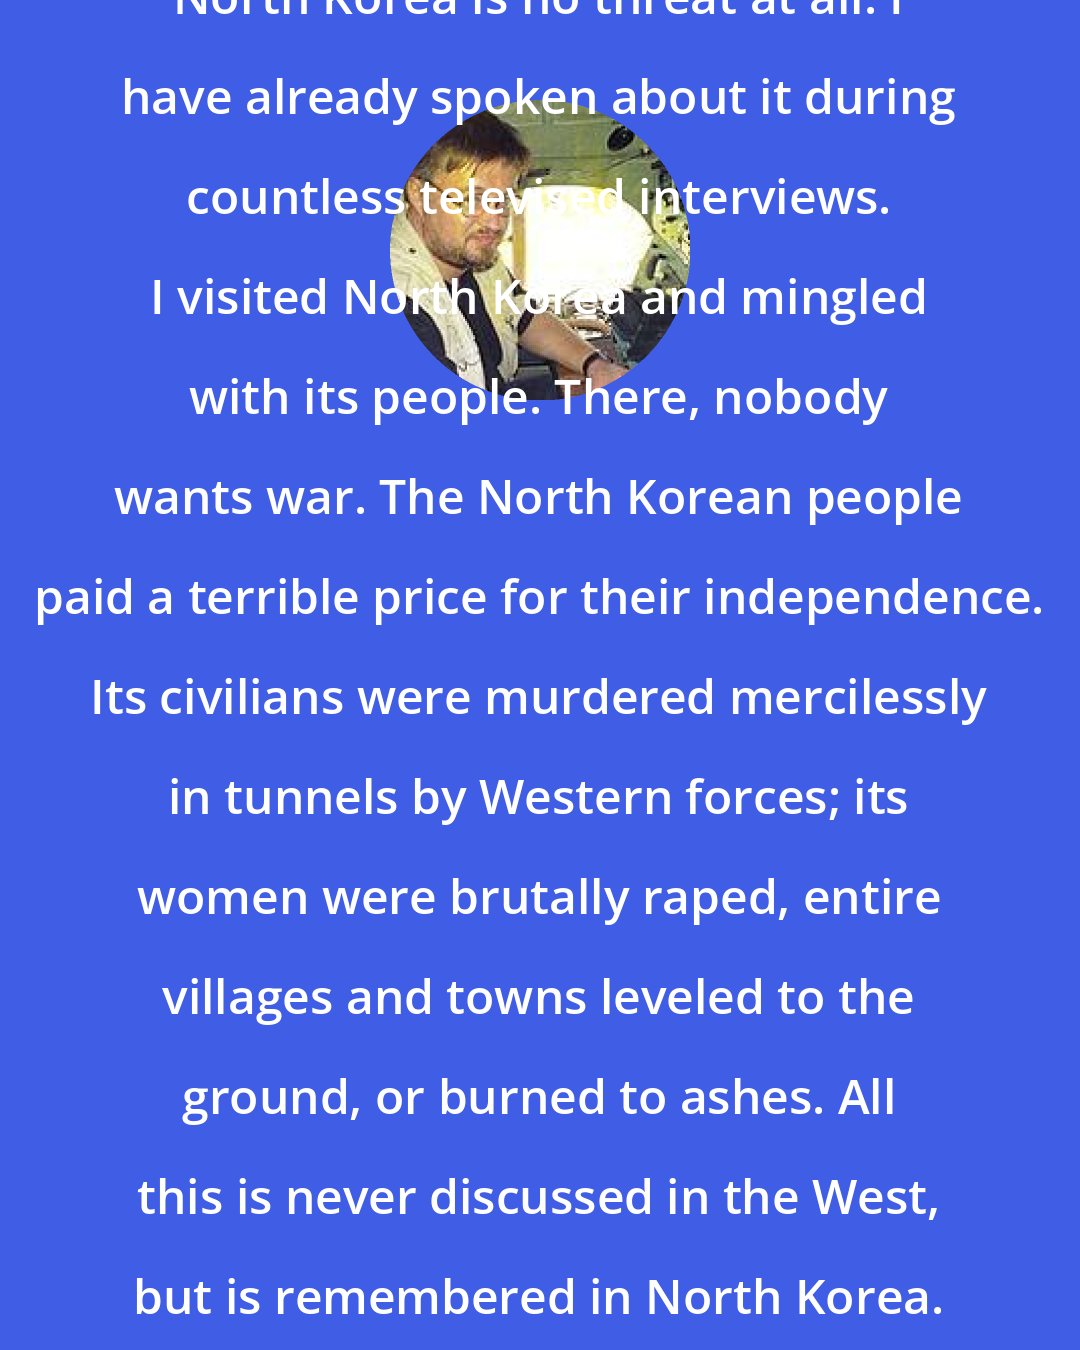 Andre Vltchek: North Korea is no threat at all. I have already spoken about it during countless televised interviews. I visited North Korea and mingled with its people. There, nobody wants war. The North Korean people paid a terrible price for their independence. Its civilians were murdered mercilessly in tunnels by Western forces; its women were brutally raped, entire villages and towns leveled to the ground, or burned to ashes. All this is never discussed in the West, but is remembered in North Korea.